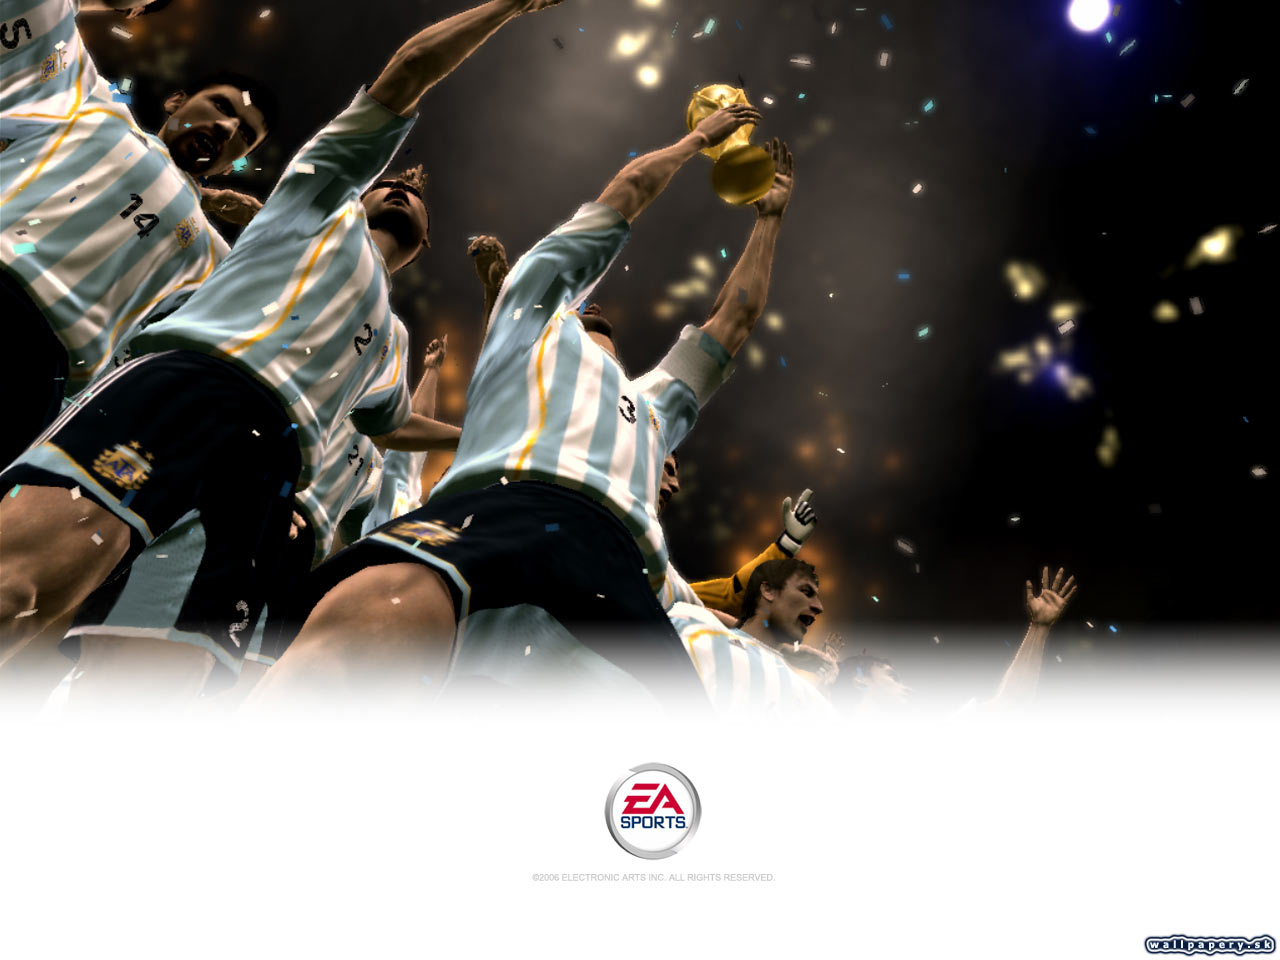 2006 FIFA World Cup Germany - wallpaper 1